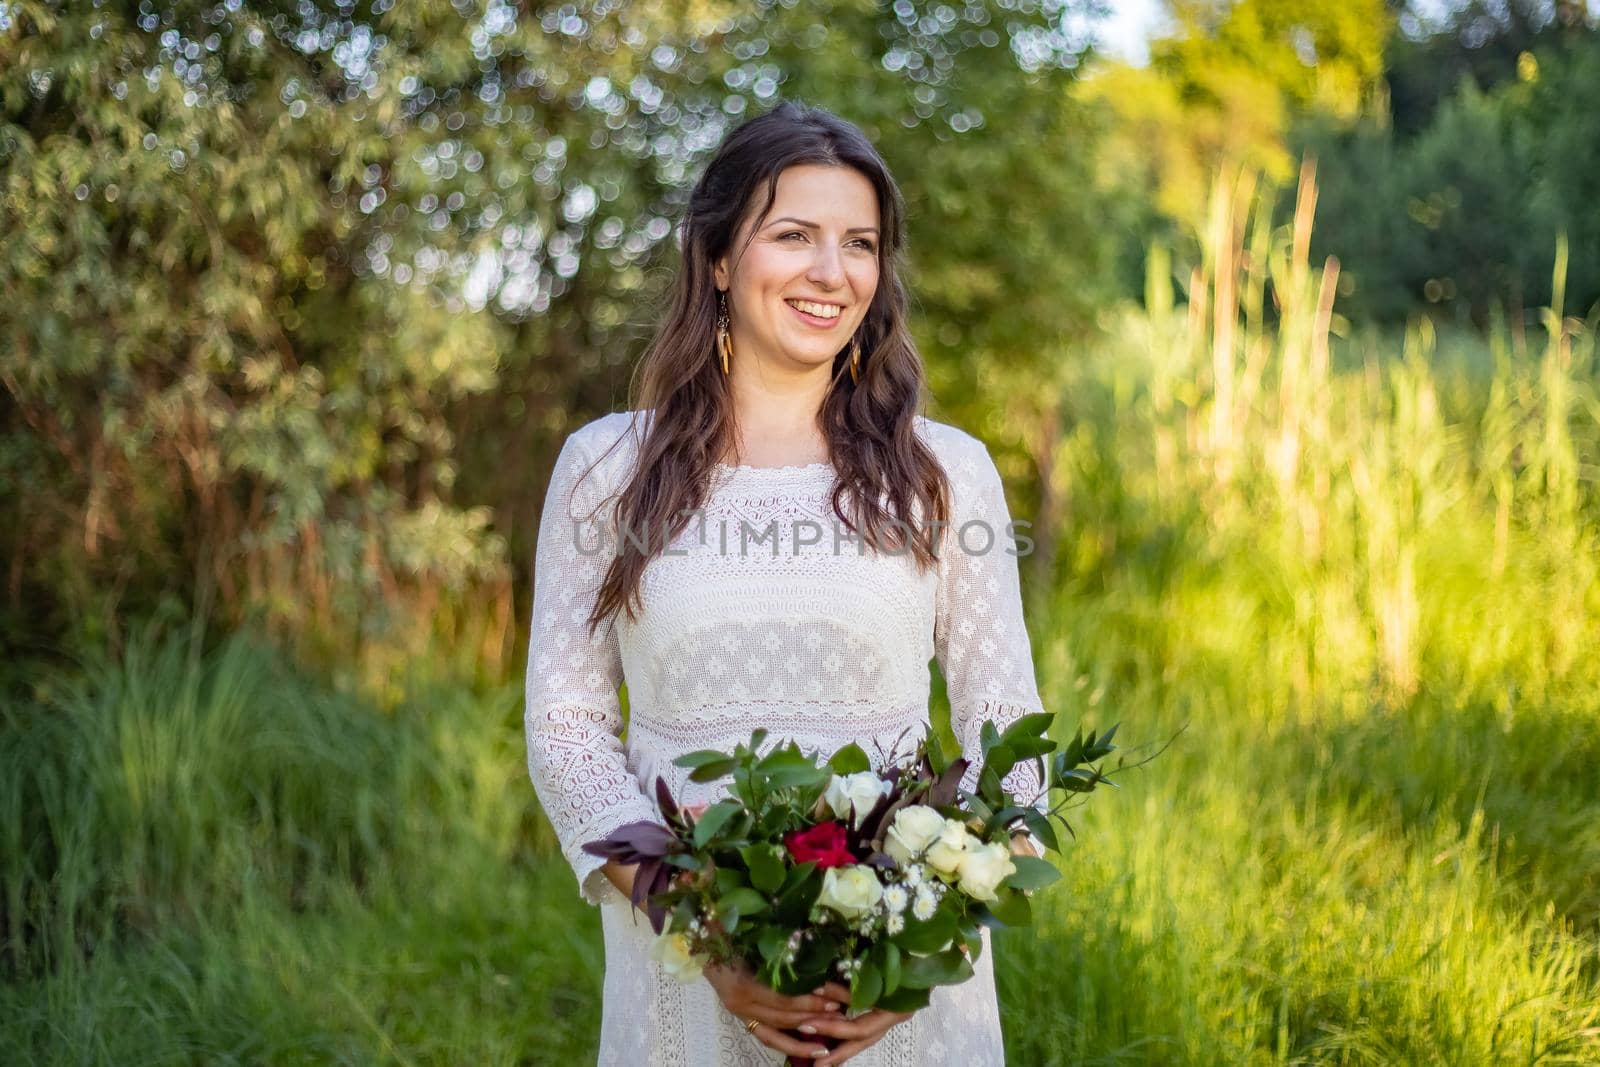 Beautiful Bride wedding day outdoors, happy newlywed woman with marriage flowers bouquet. by Anyatachka